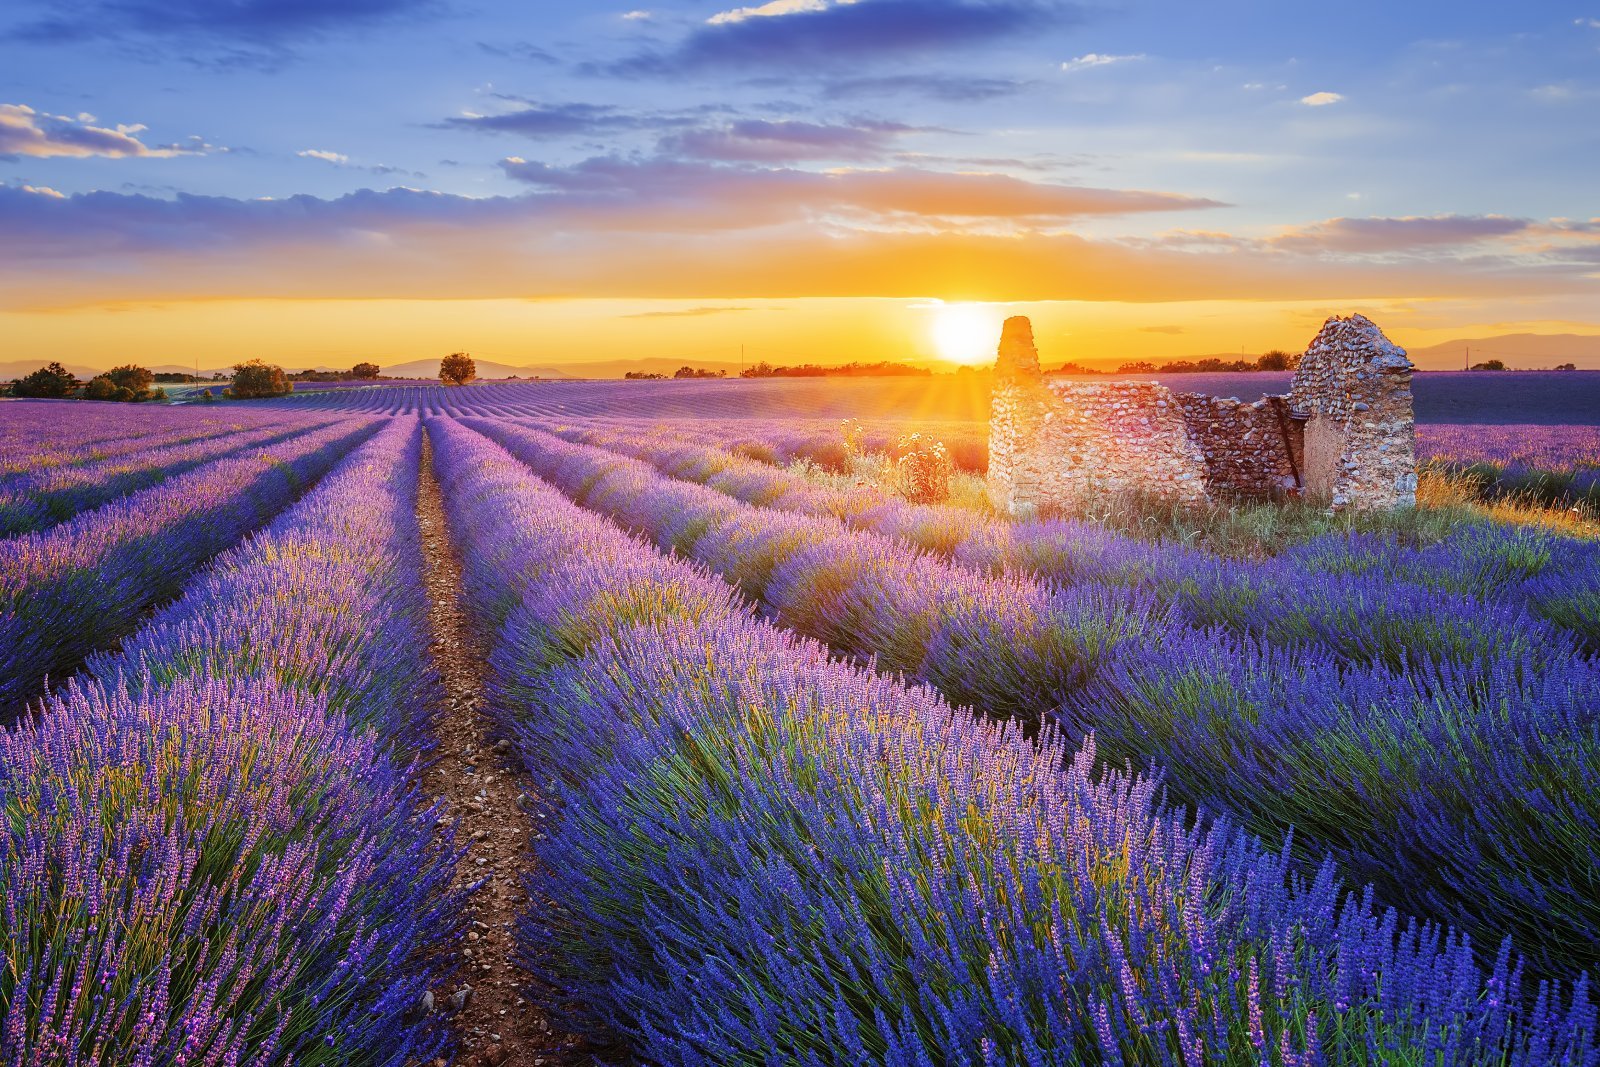 <p class="wp-caption-text">Image Credit: Shutterstock / prochasson frederic</p>  <p><span>The lavender fields of Provence bloom in vibrant purple from June to August, offering picturesque landscapes. The region celebrates this bloom with festivals in several towns featuring lavender products and demonstrations.</span></p> <p><b>Insider’s Tip: </b><span>Early morning or late afternoon offers the best light for photographs.</span></p> <p><b>When to Travel: </b><span>Late June to early August</span></p> <p><b>How to Get There: </b><span>Fly into Marseille or Nice, then drive or take a local bus to the lavender-growing areas like Valensole or Sault.</span></p>